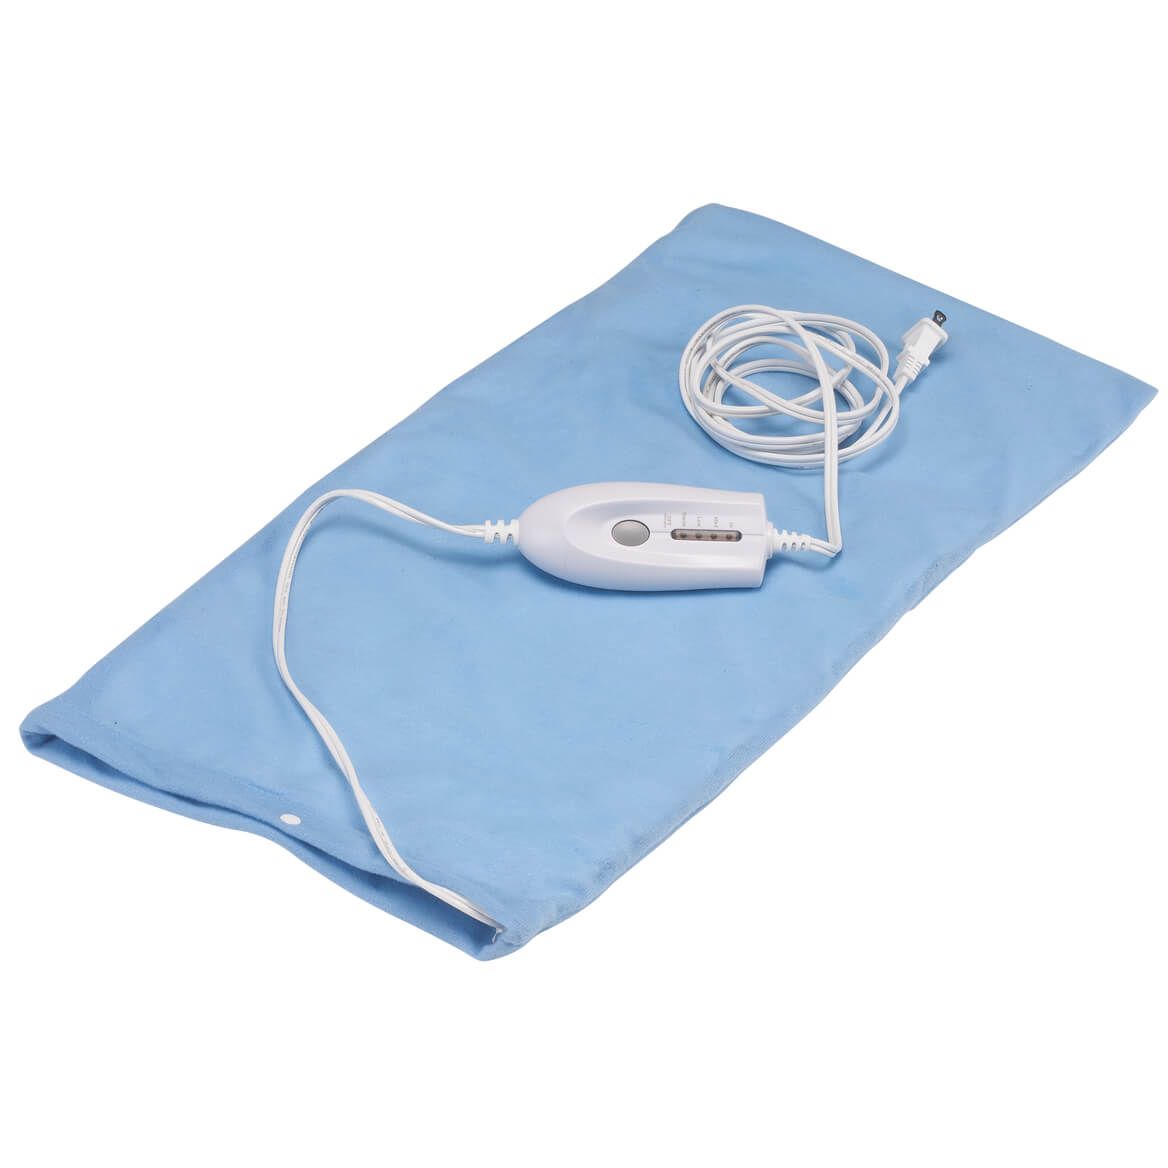 Deluxe XL Heating Pad + '-' + 351196